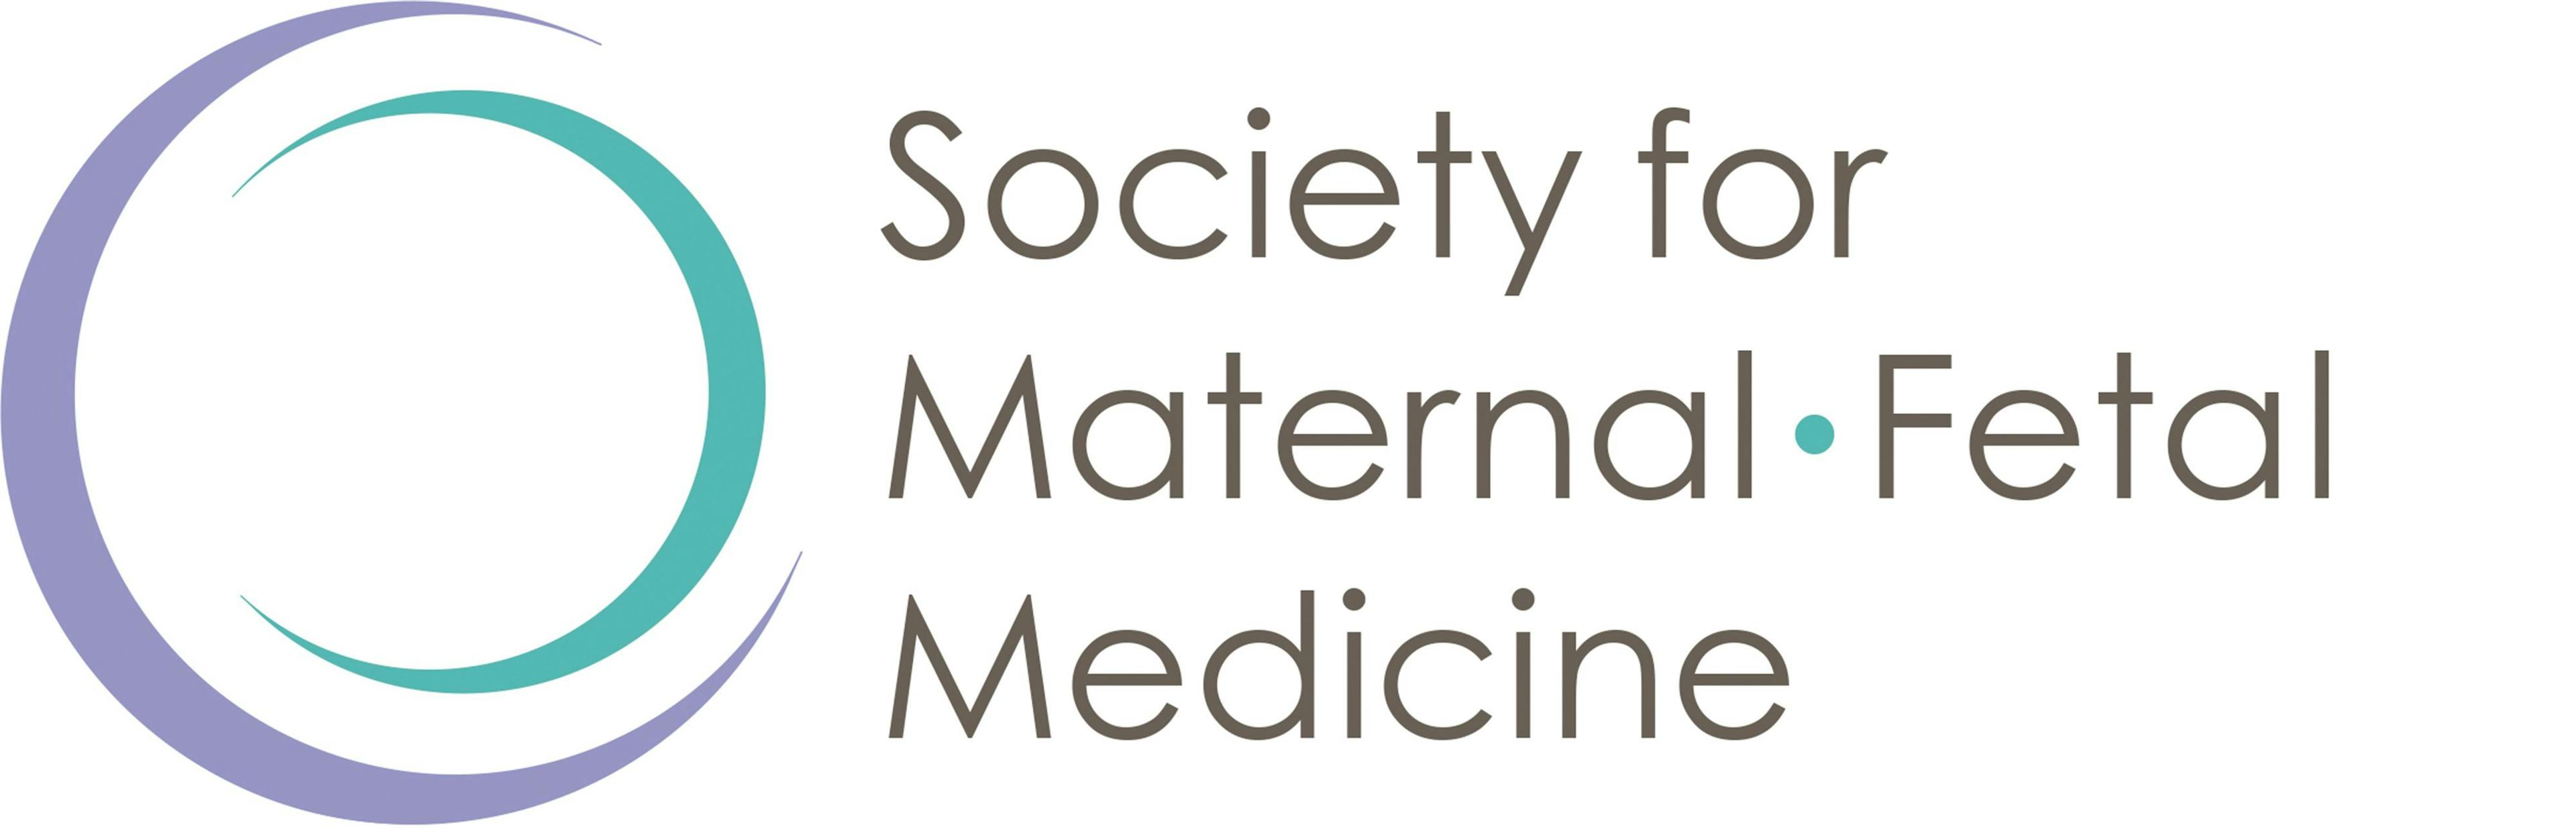 COVID-19 Resource Update: Society for Maternal-Fetal Medicine